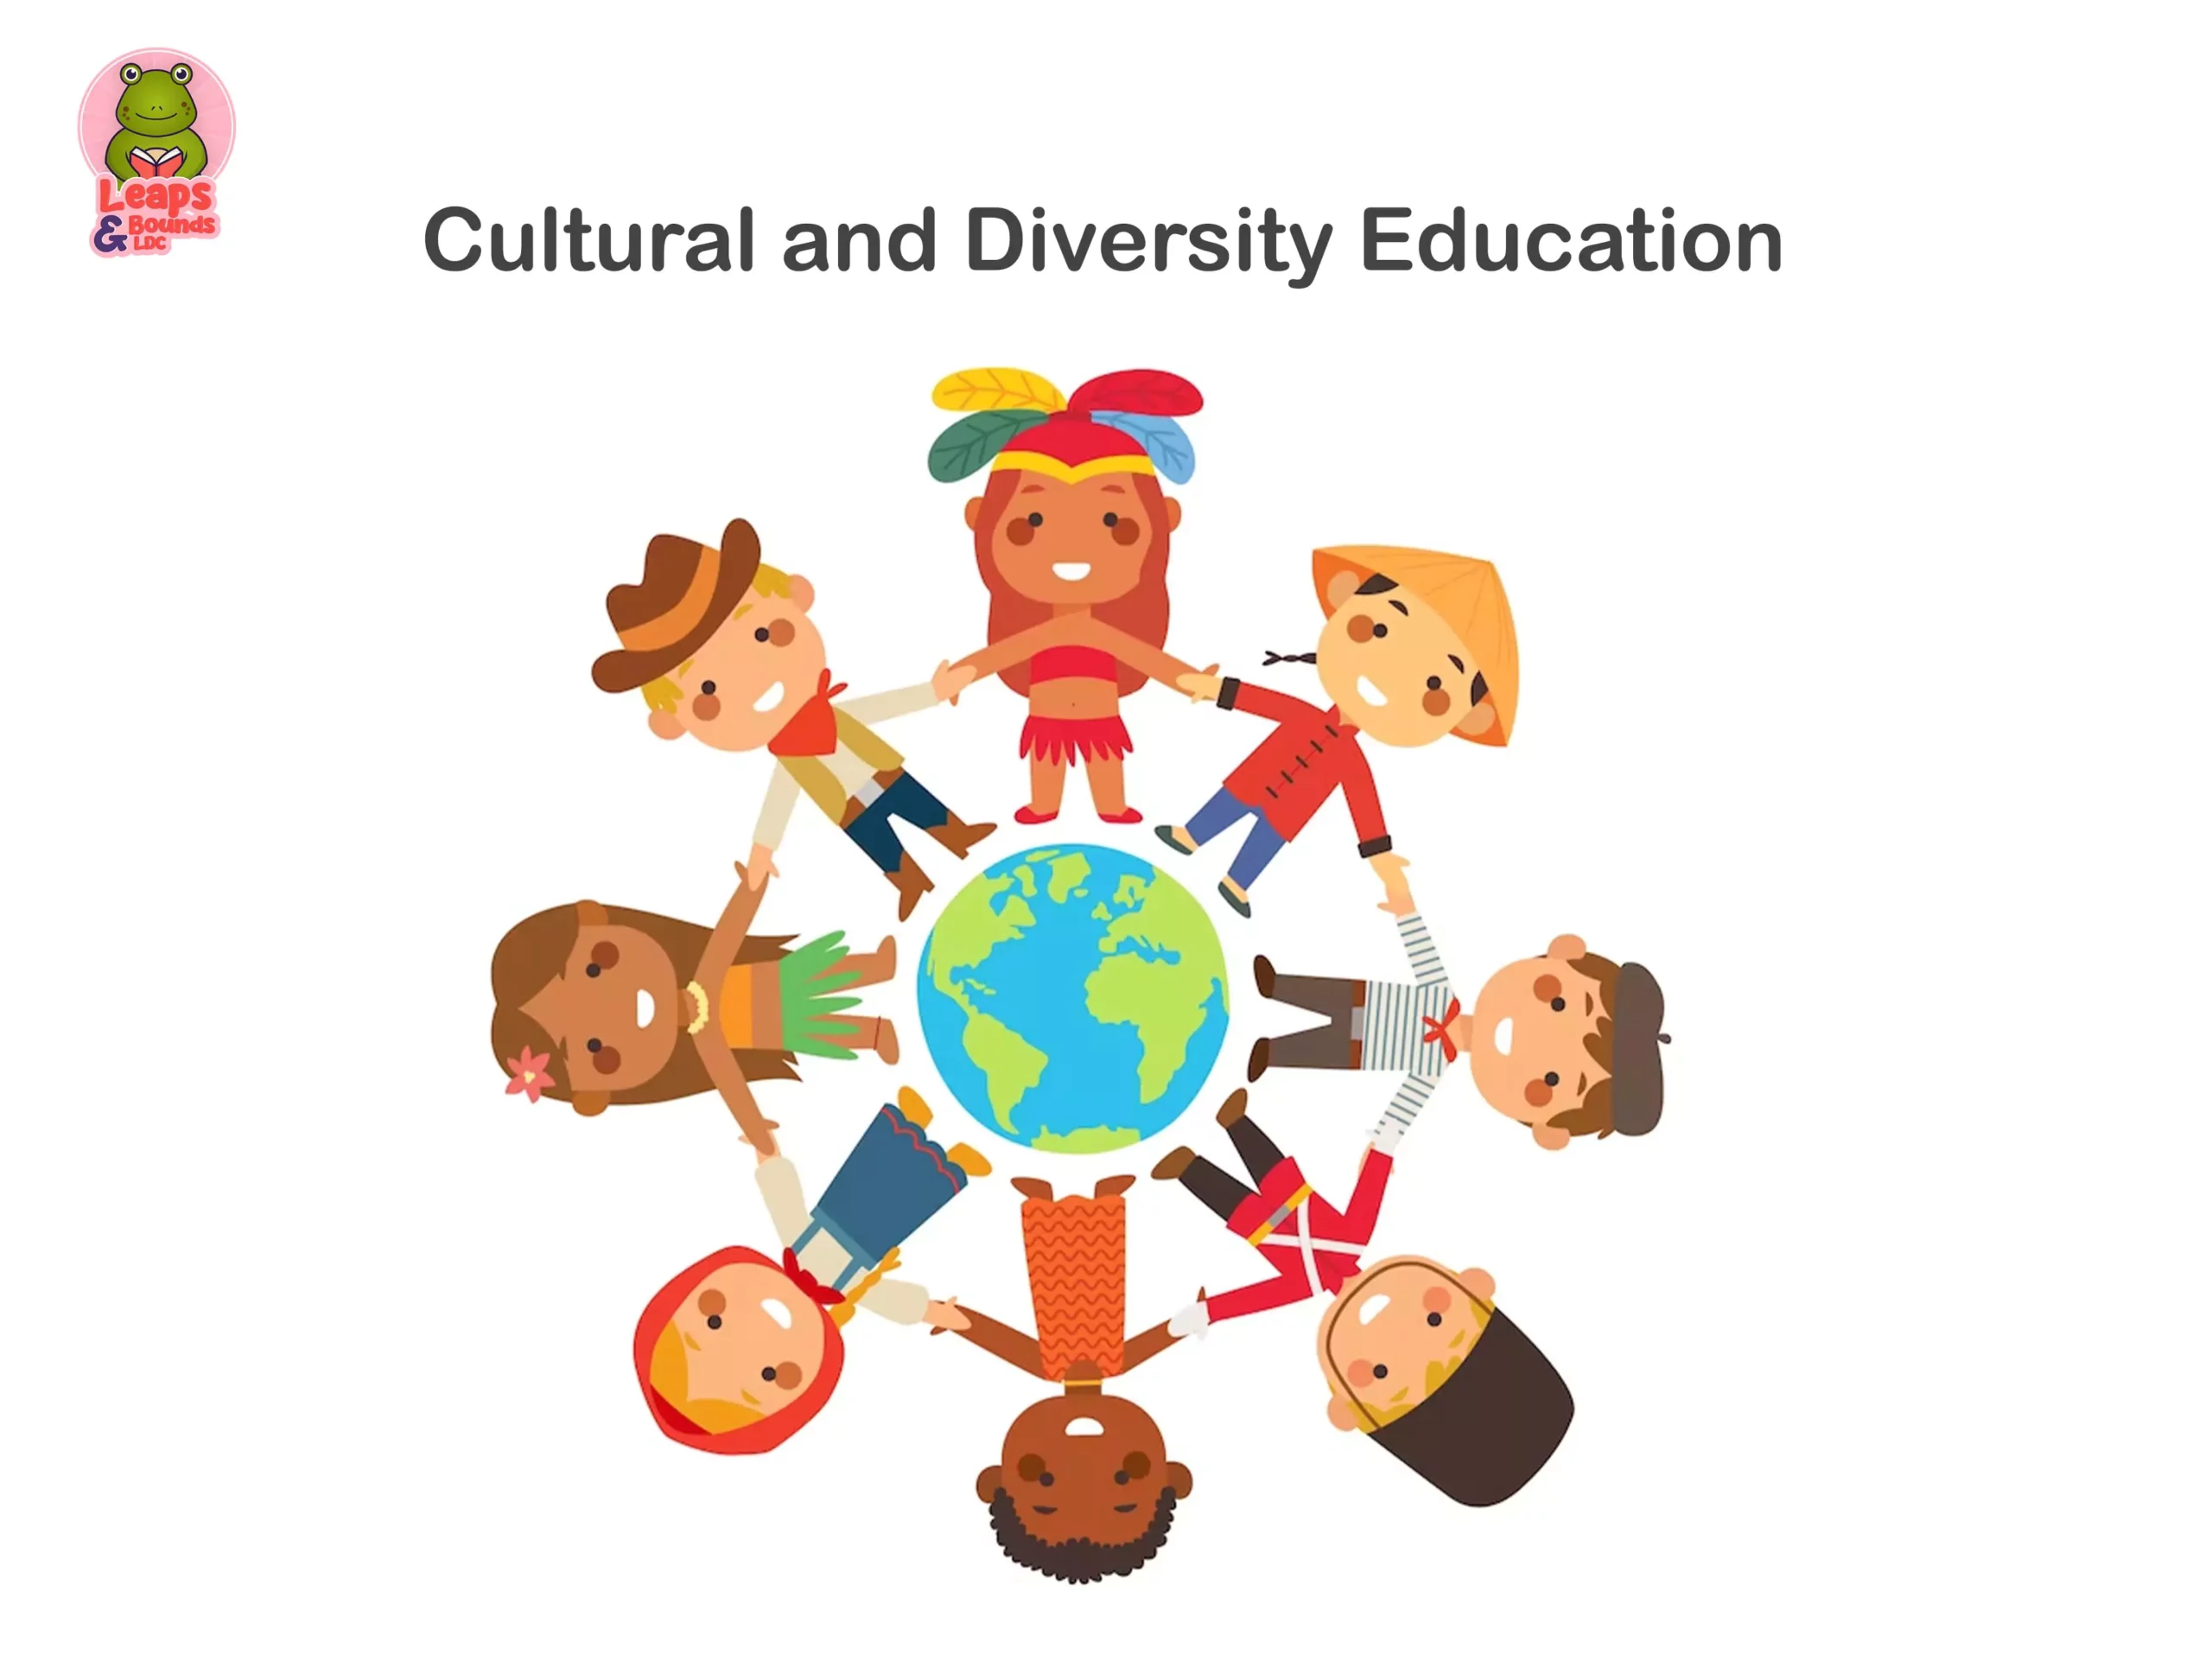 Cultural and Diversity Education